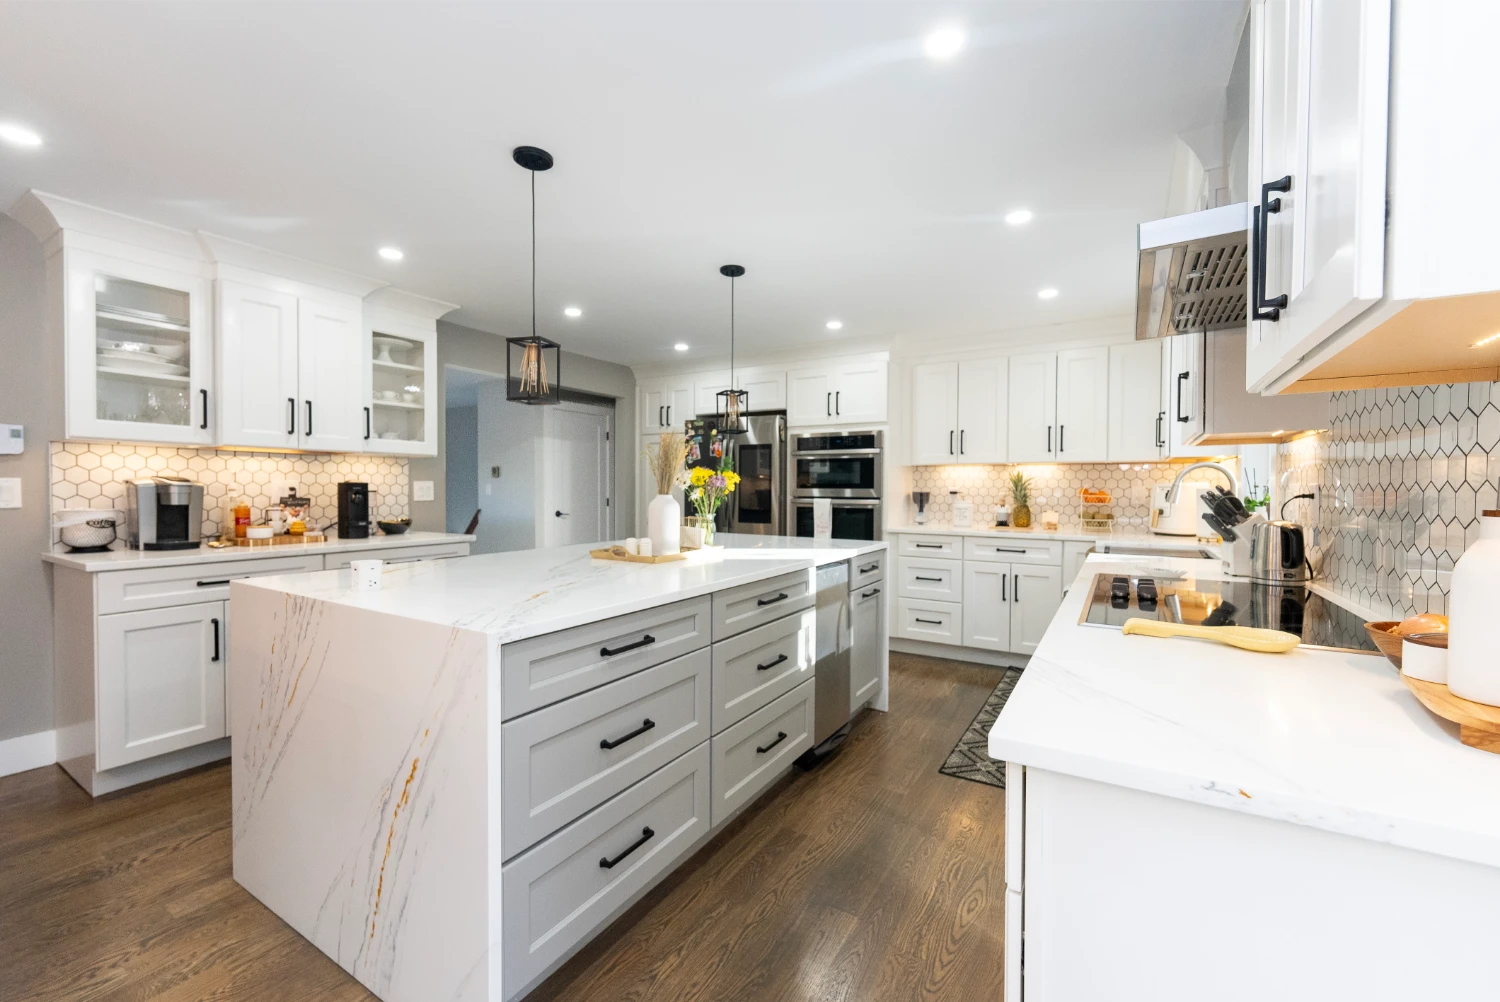 Modern kitchen remodel with white cabinets, island, and hexagon tile backsplash.